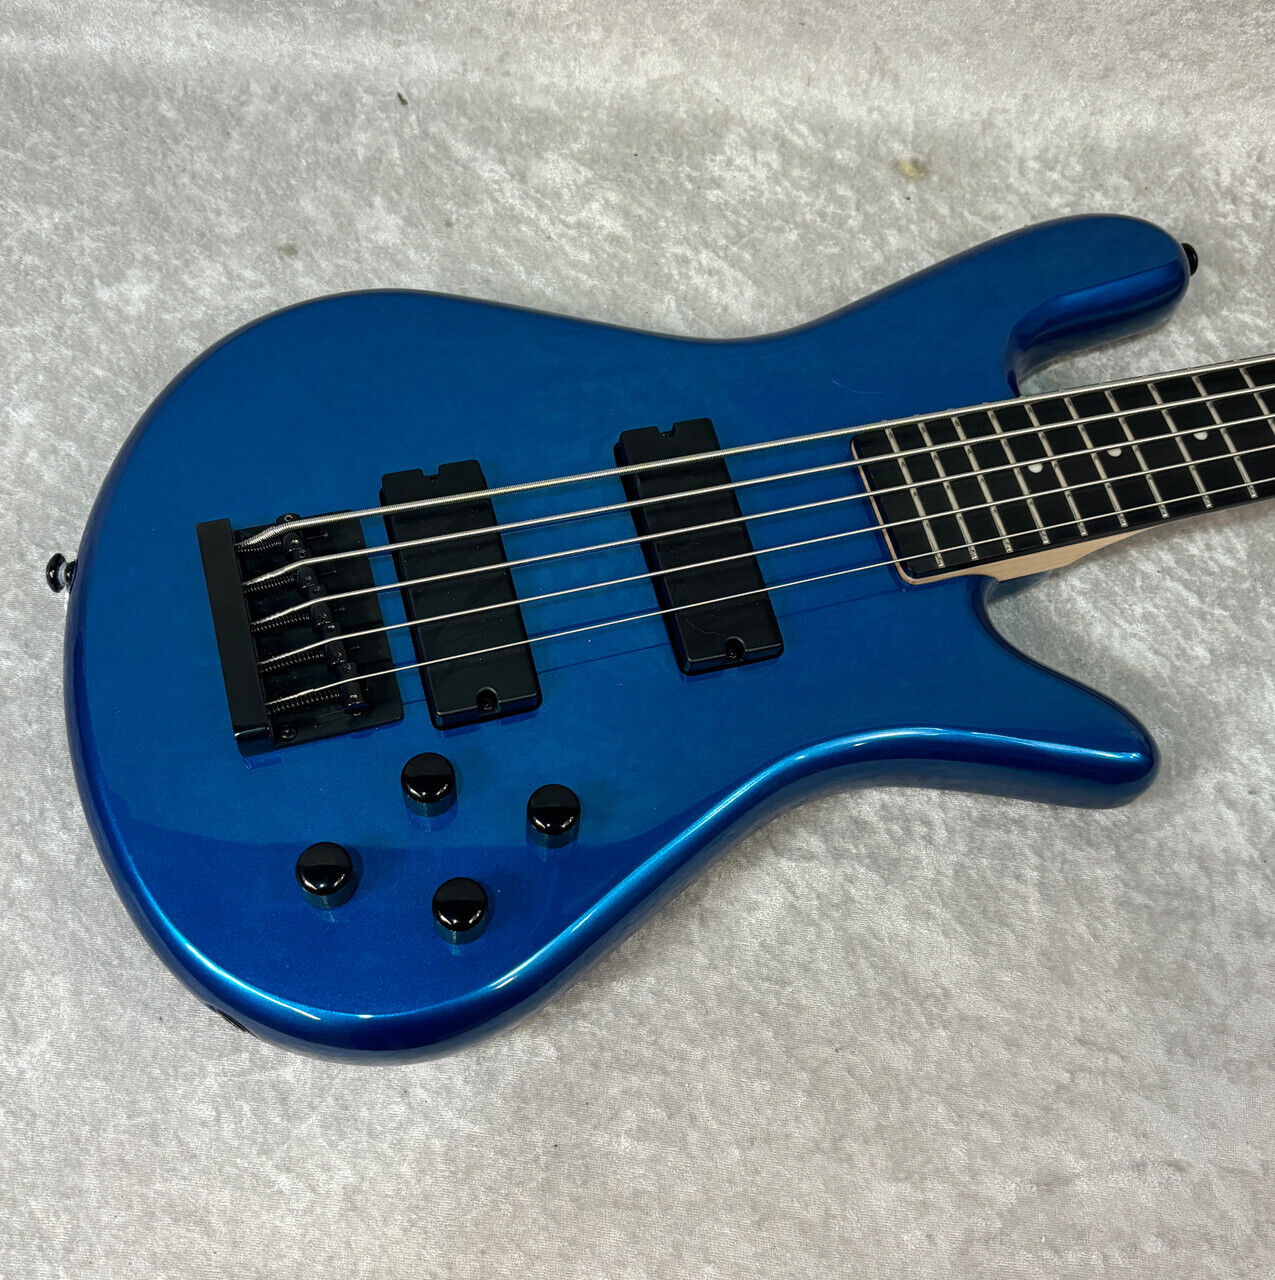 Spector NS Performer 5 fiver string electric bass guitar in metallic blue